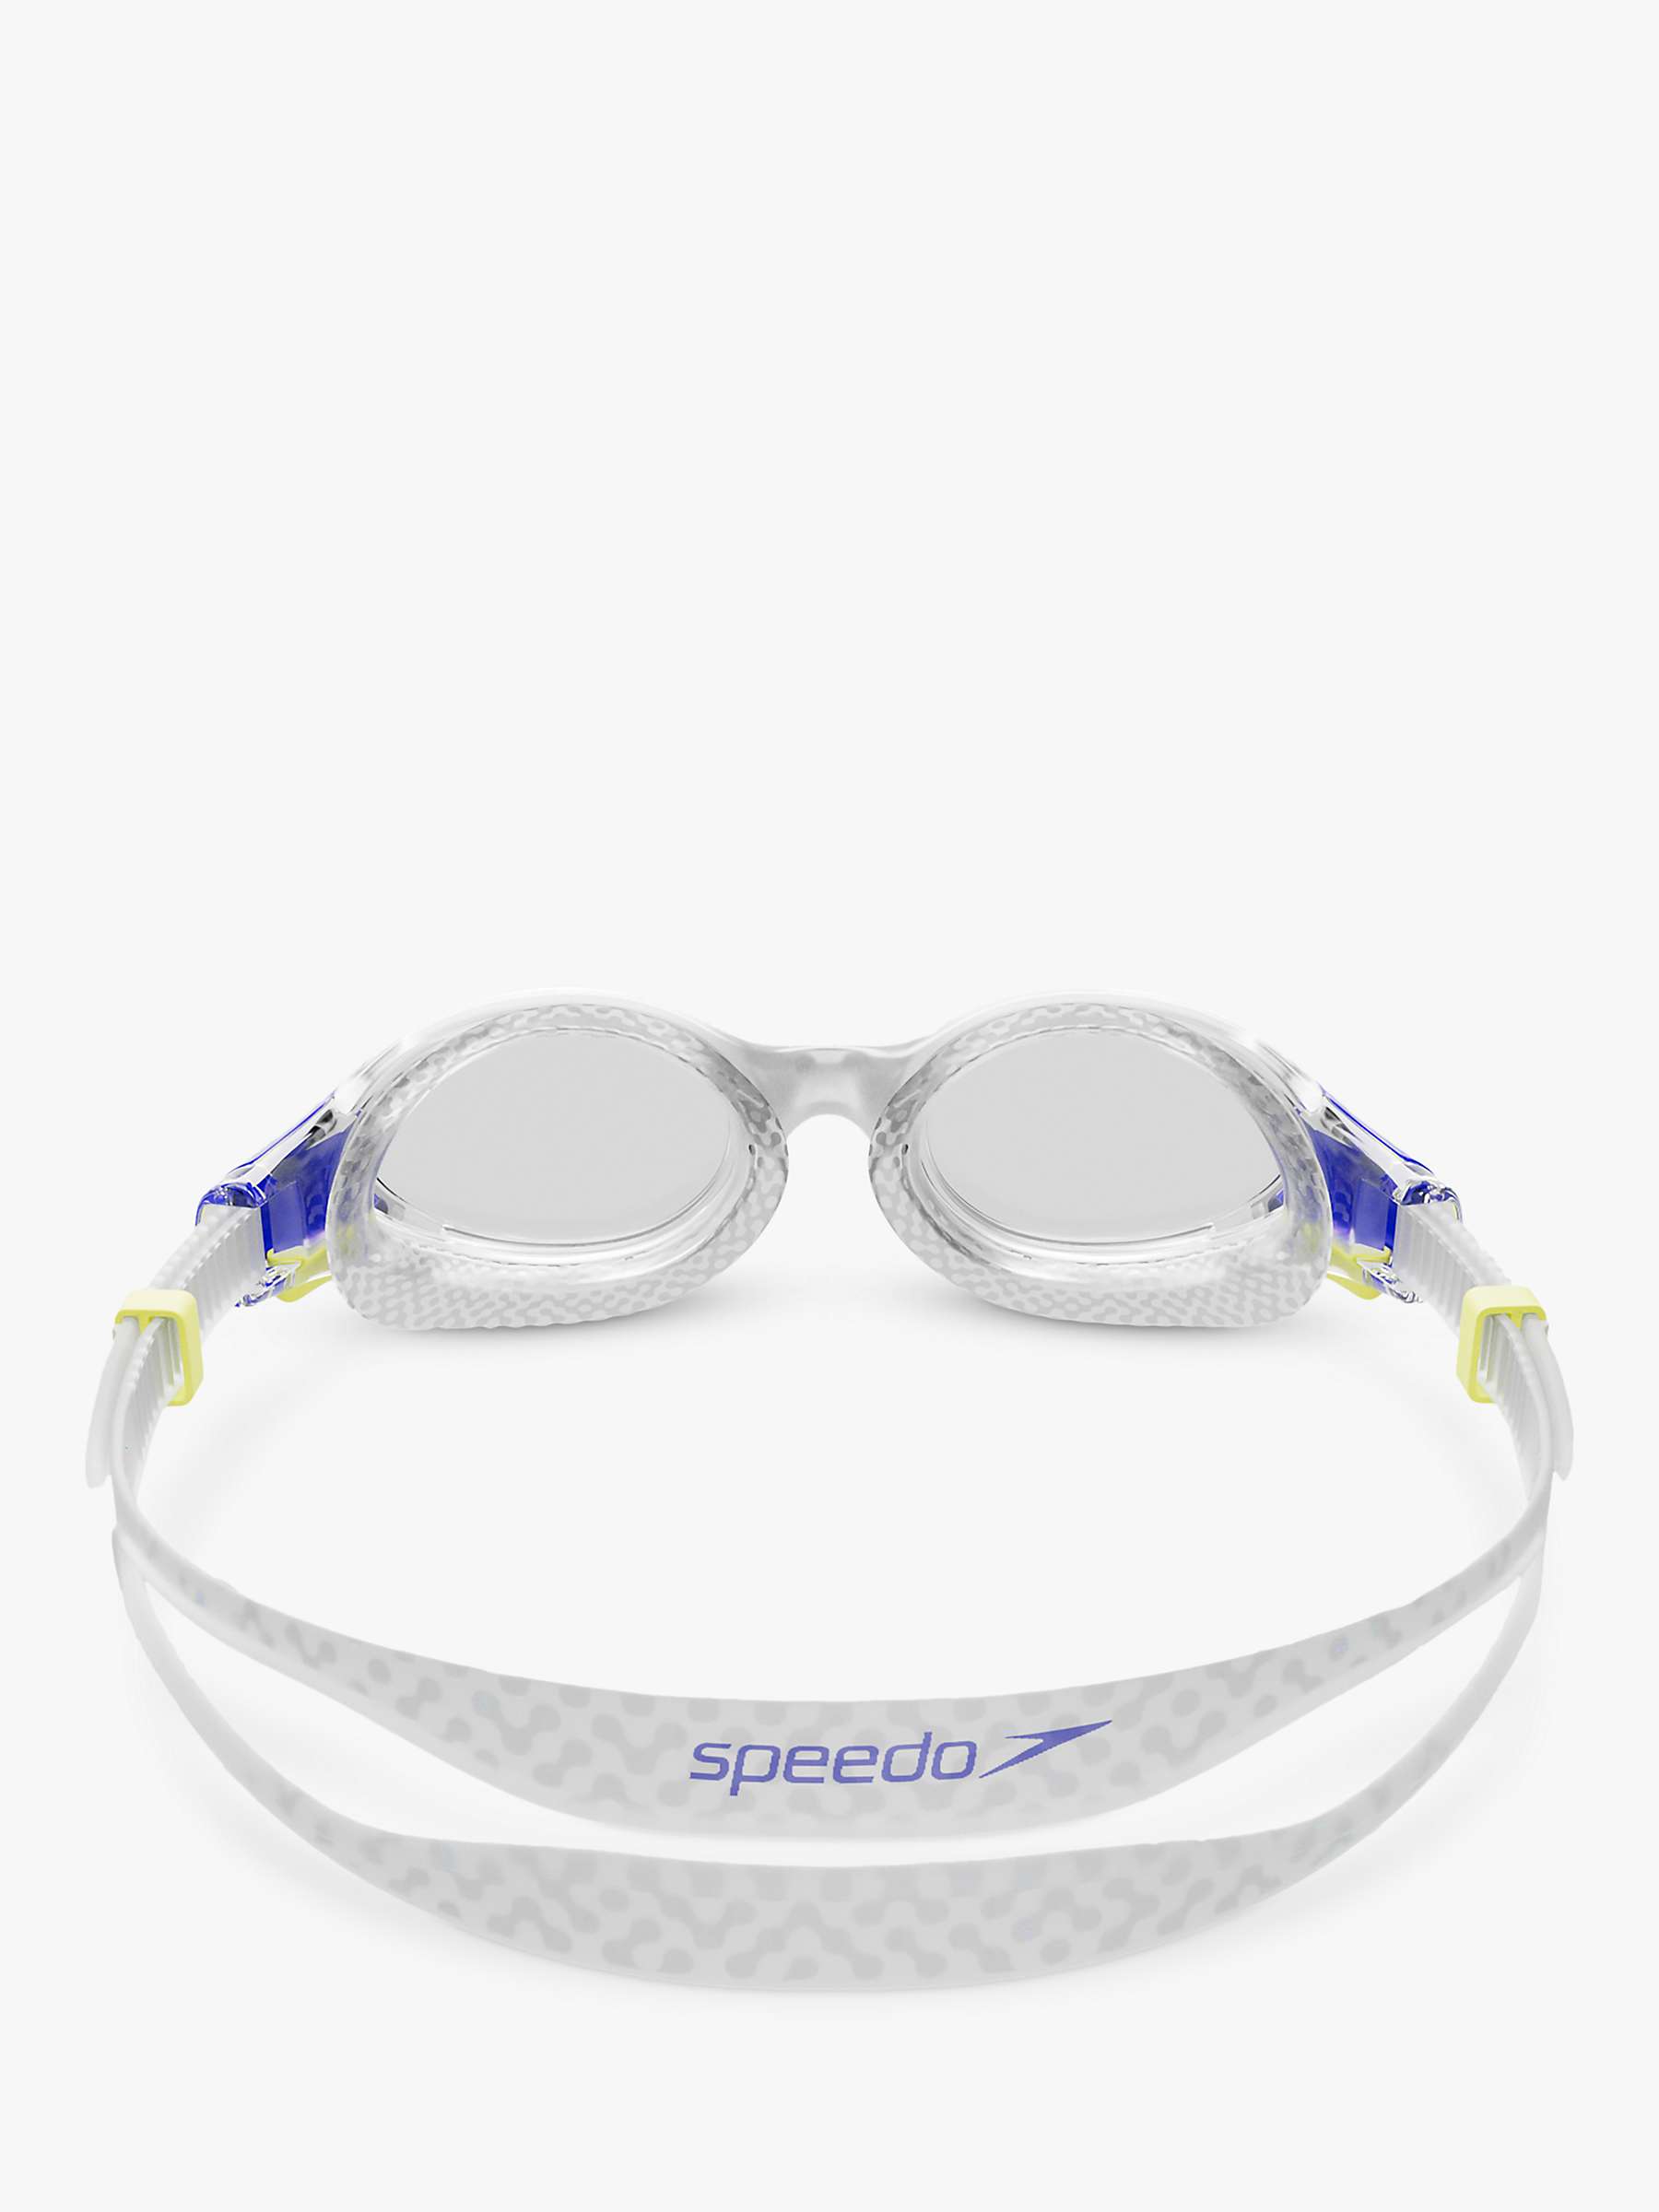 Buy Speedo Junior Biofuse 2.0 Swimming Goggles, Clear Online at johnlewis.com